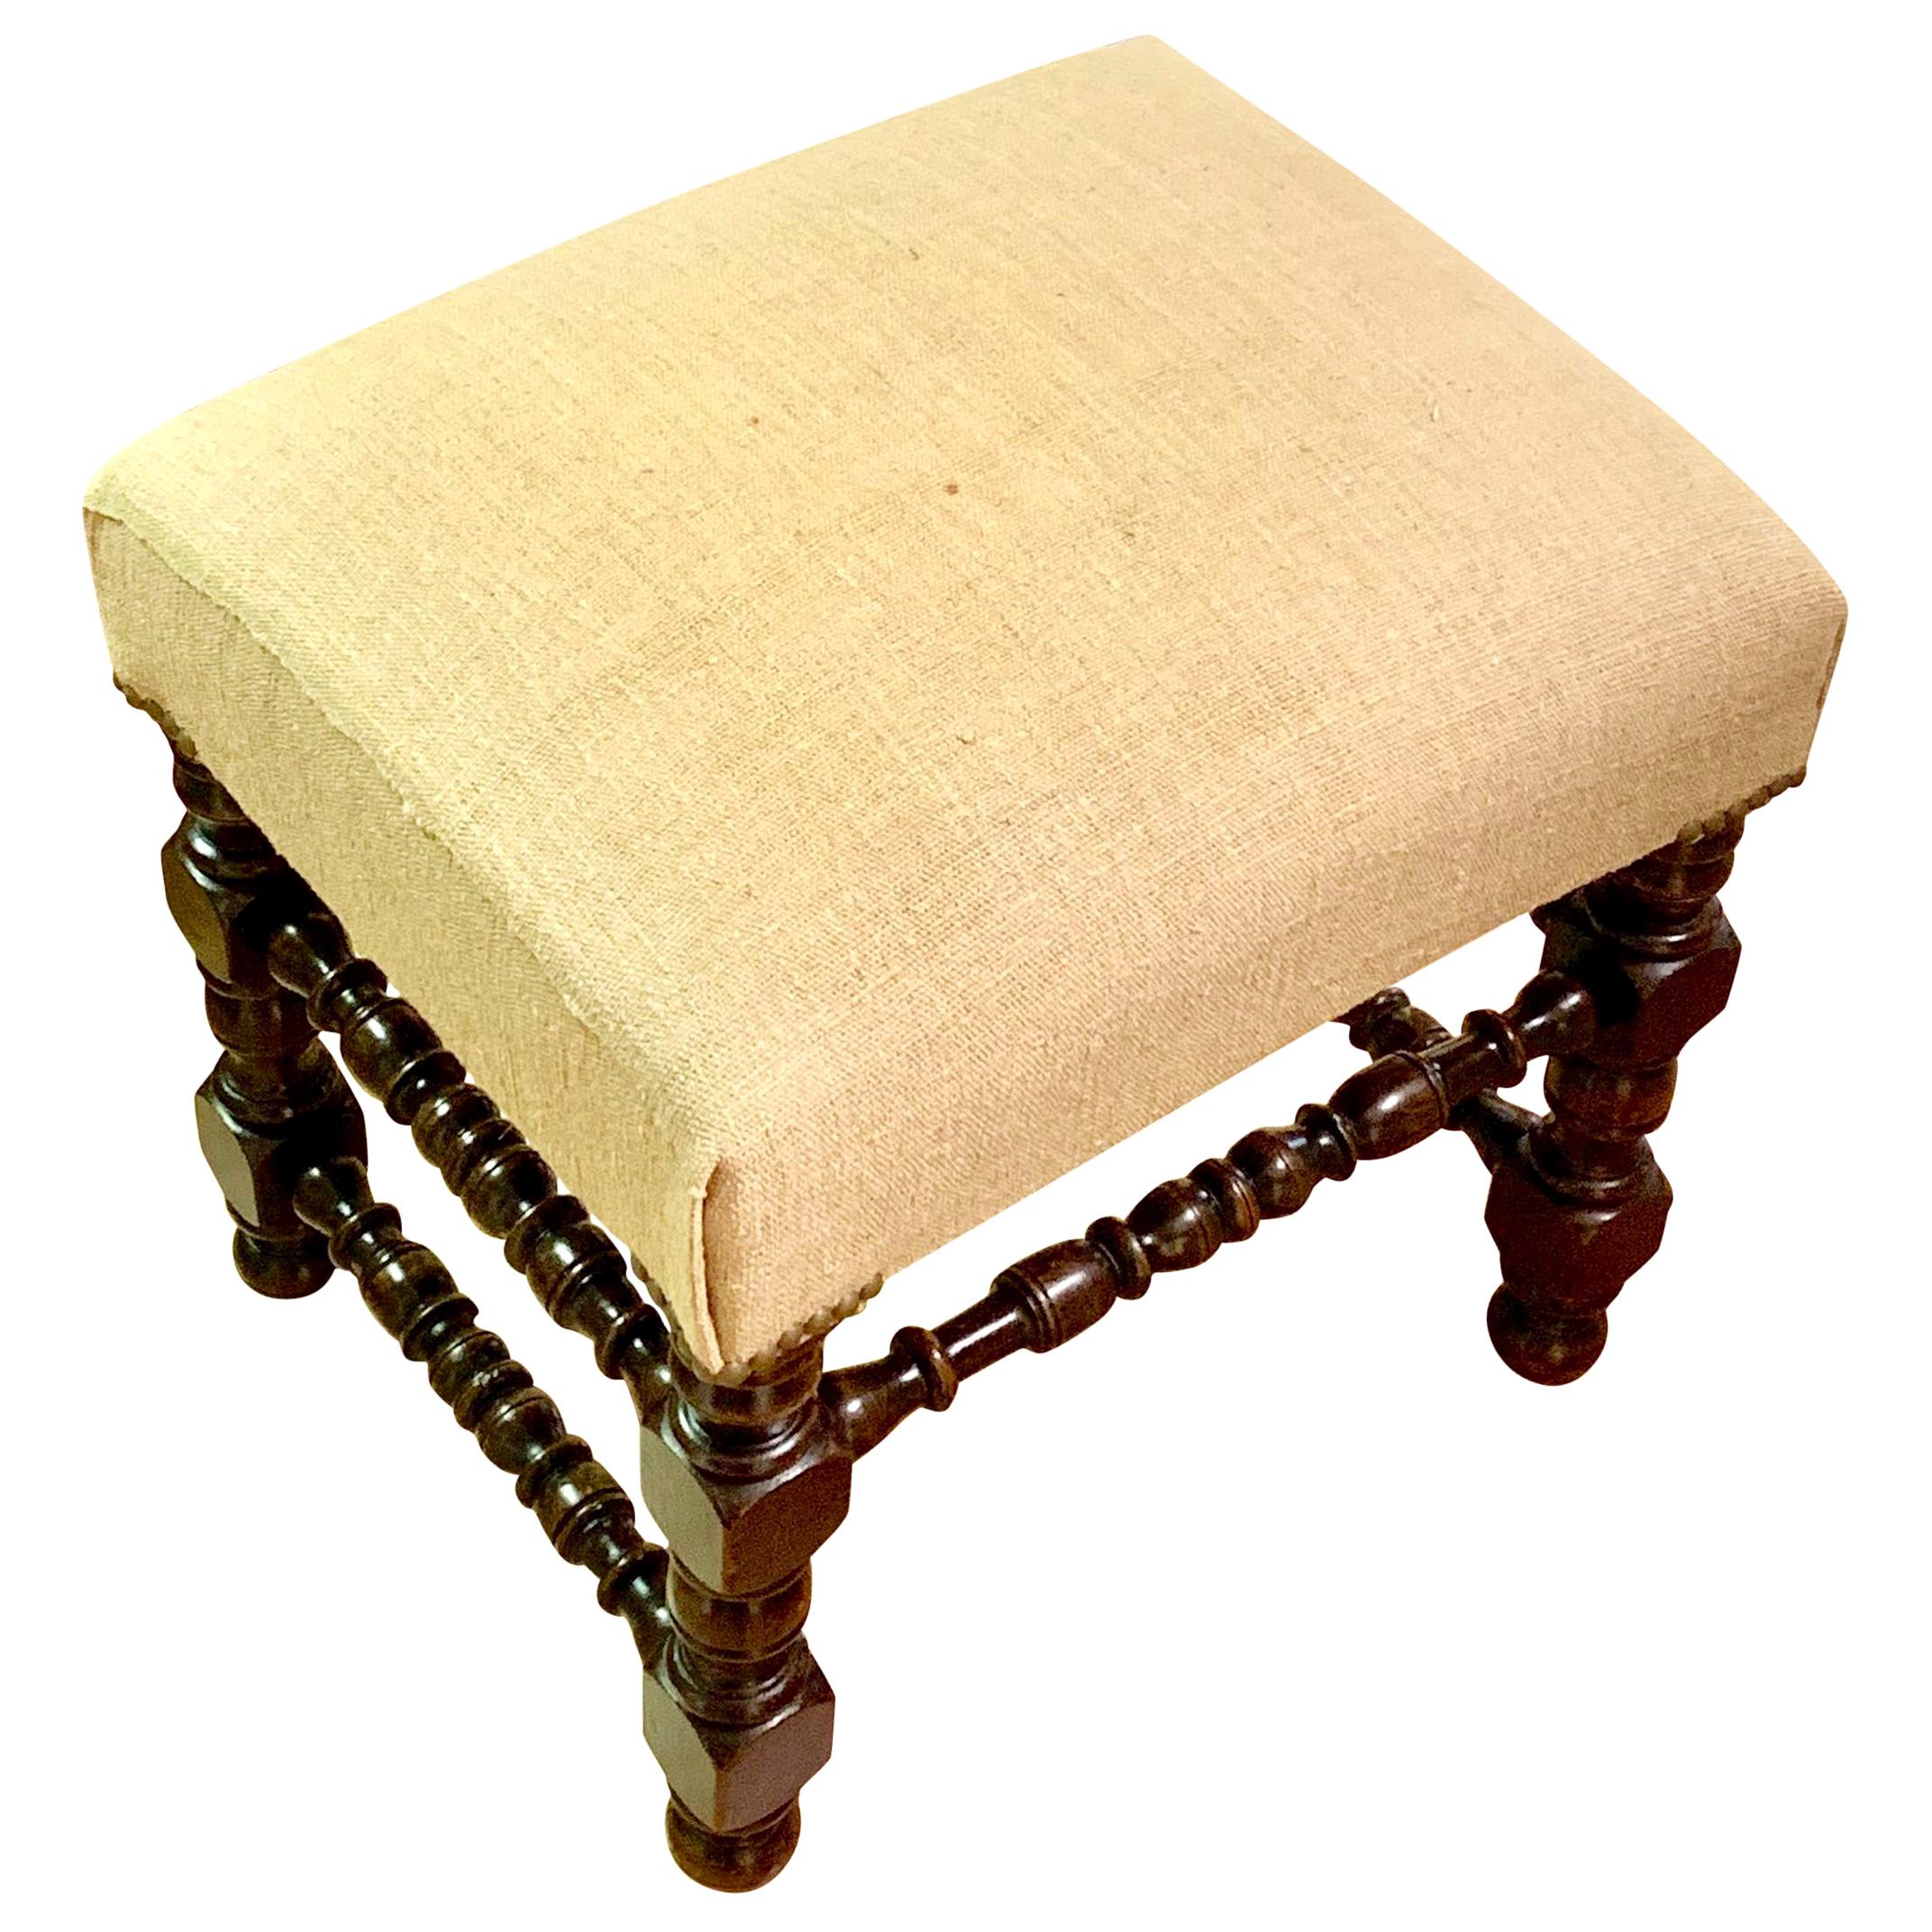 Upholstered Foot Stools, France, 19th Century